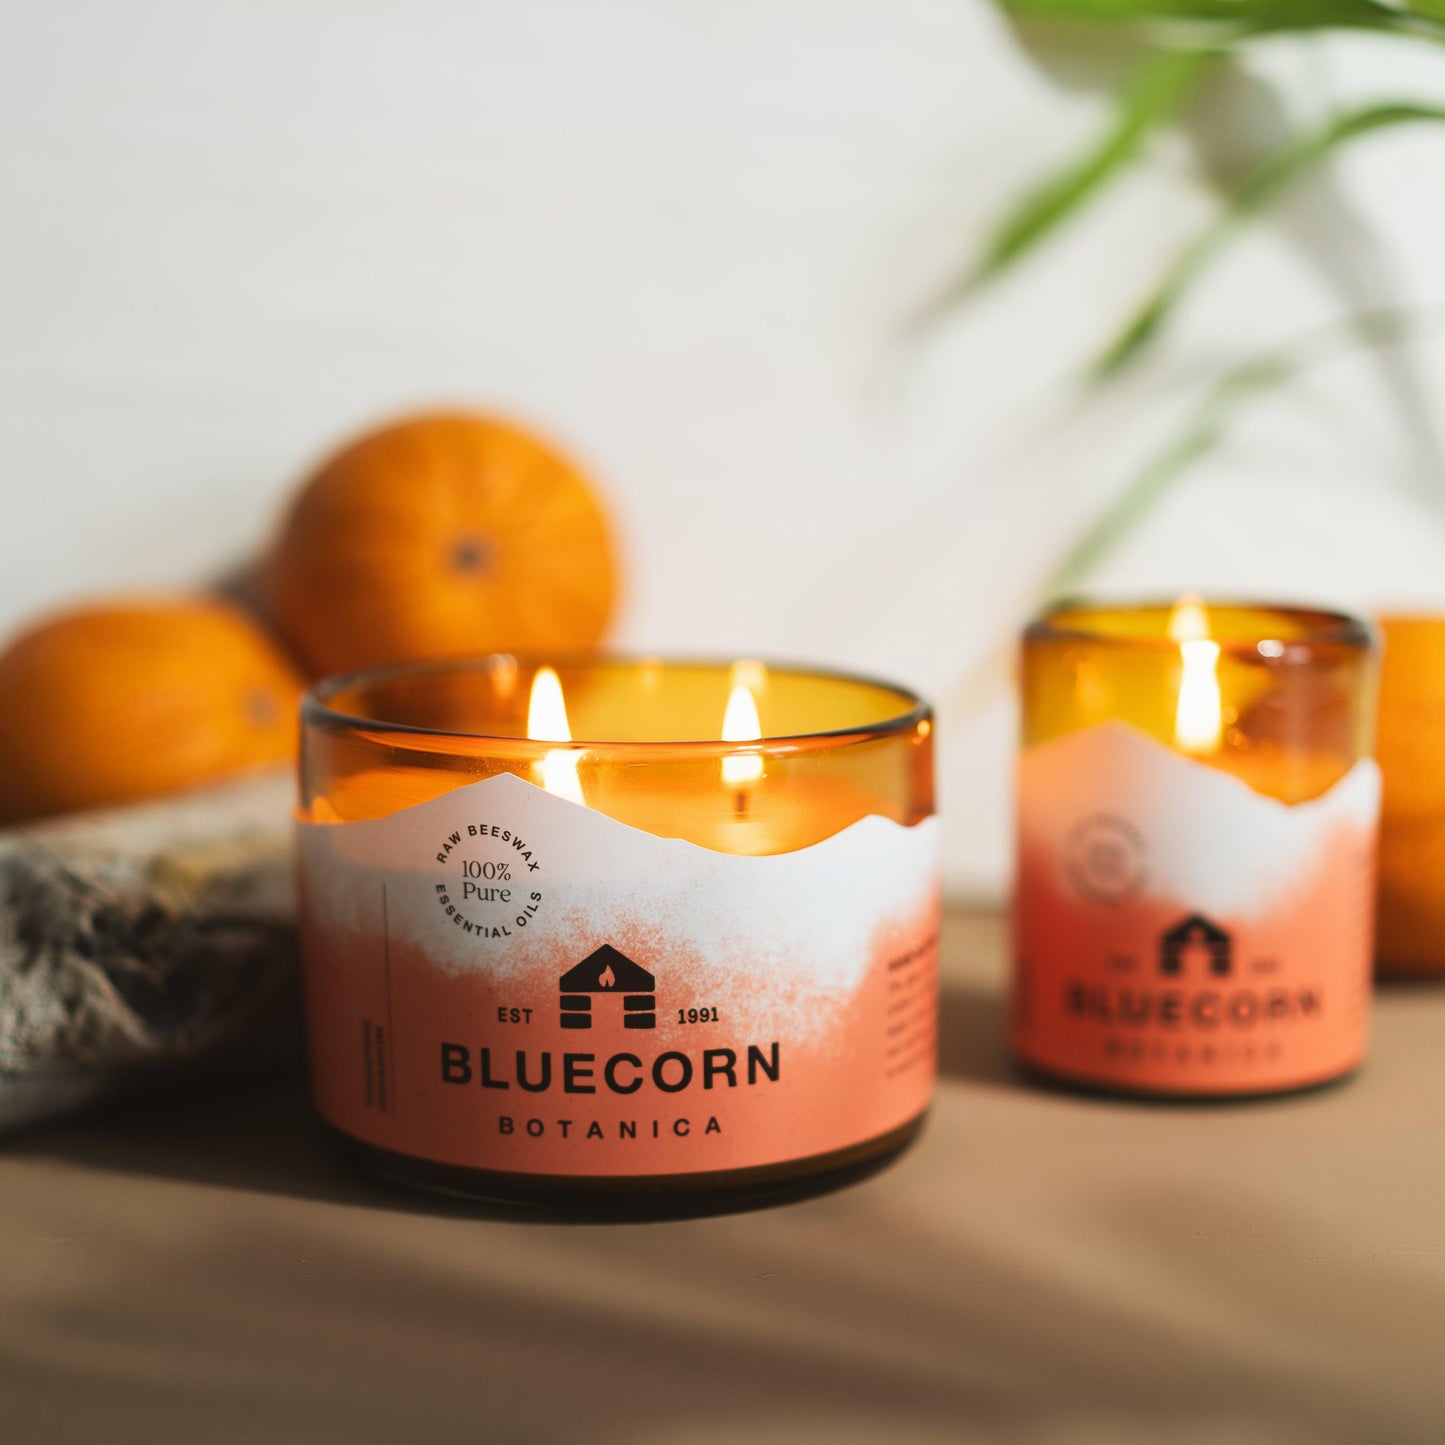 Bluecorn Beeswax Botanica pure beeswax and essential oil candles in blown glass holders. Natural scented candles made with beeswax and essential oils of tangerine and geranium. oranges in the background